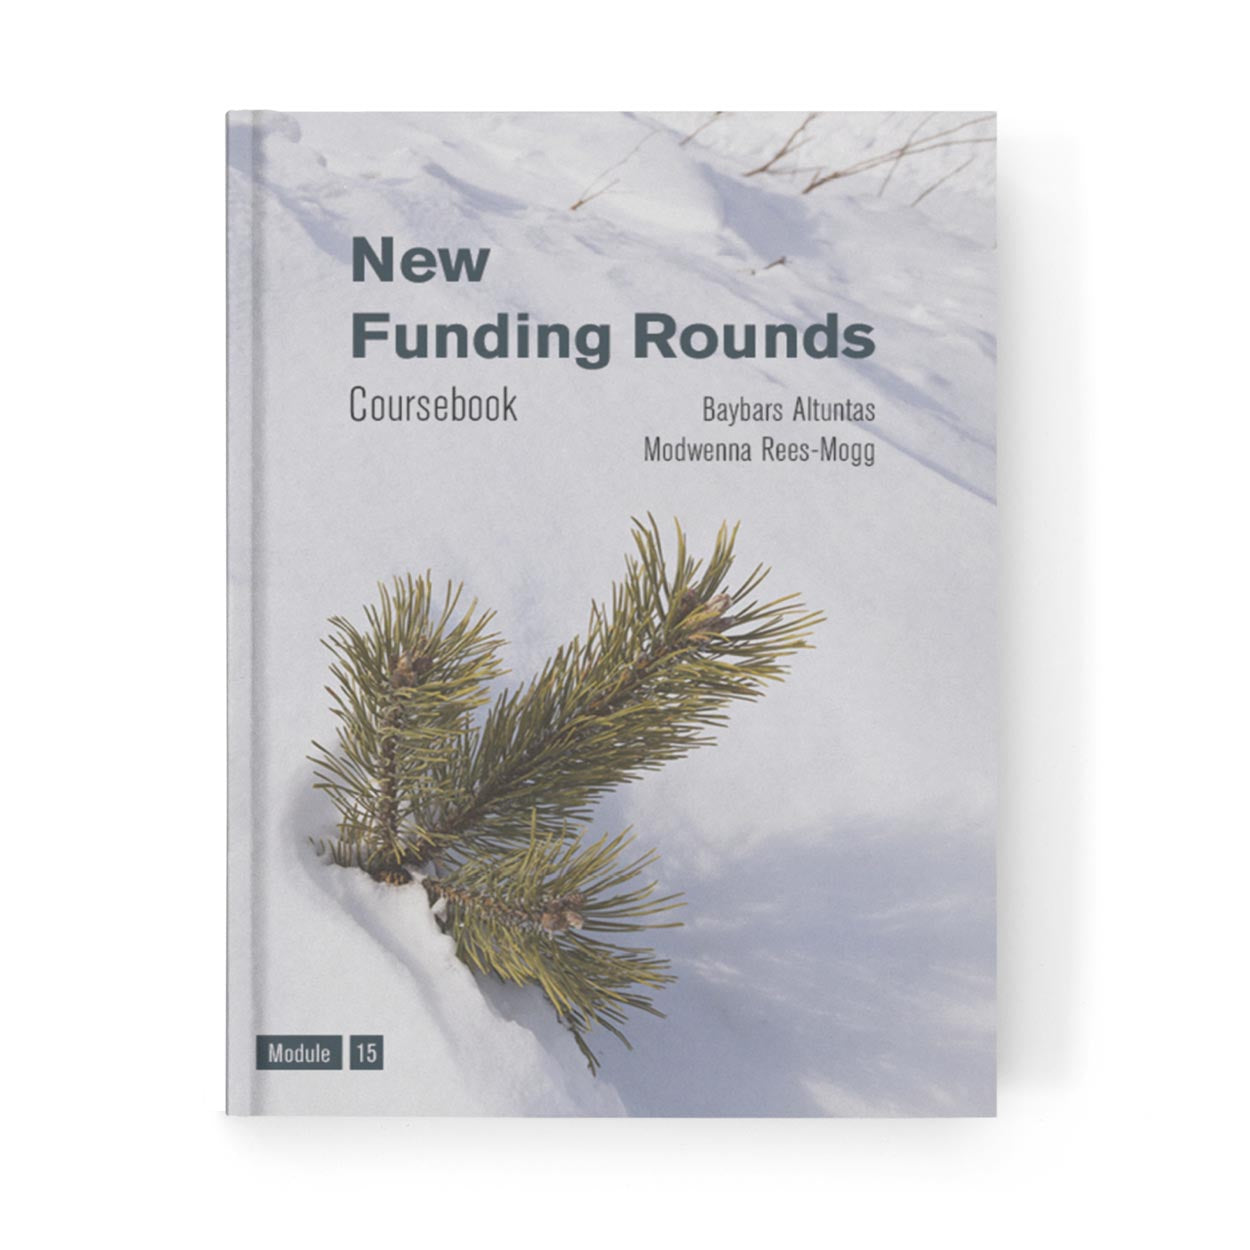 New Funding Rounds Coursebook